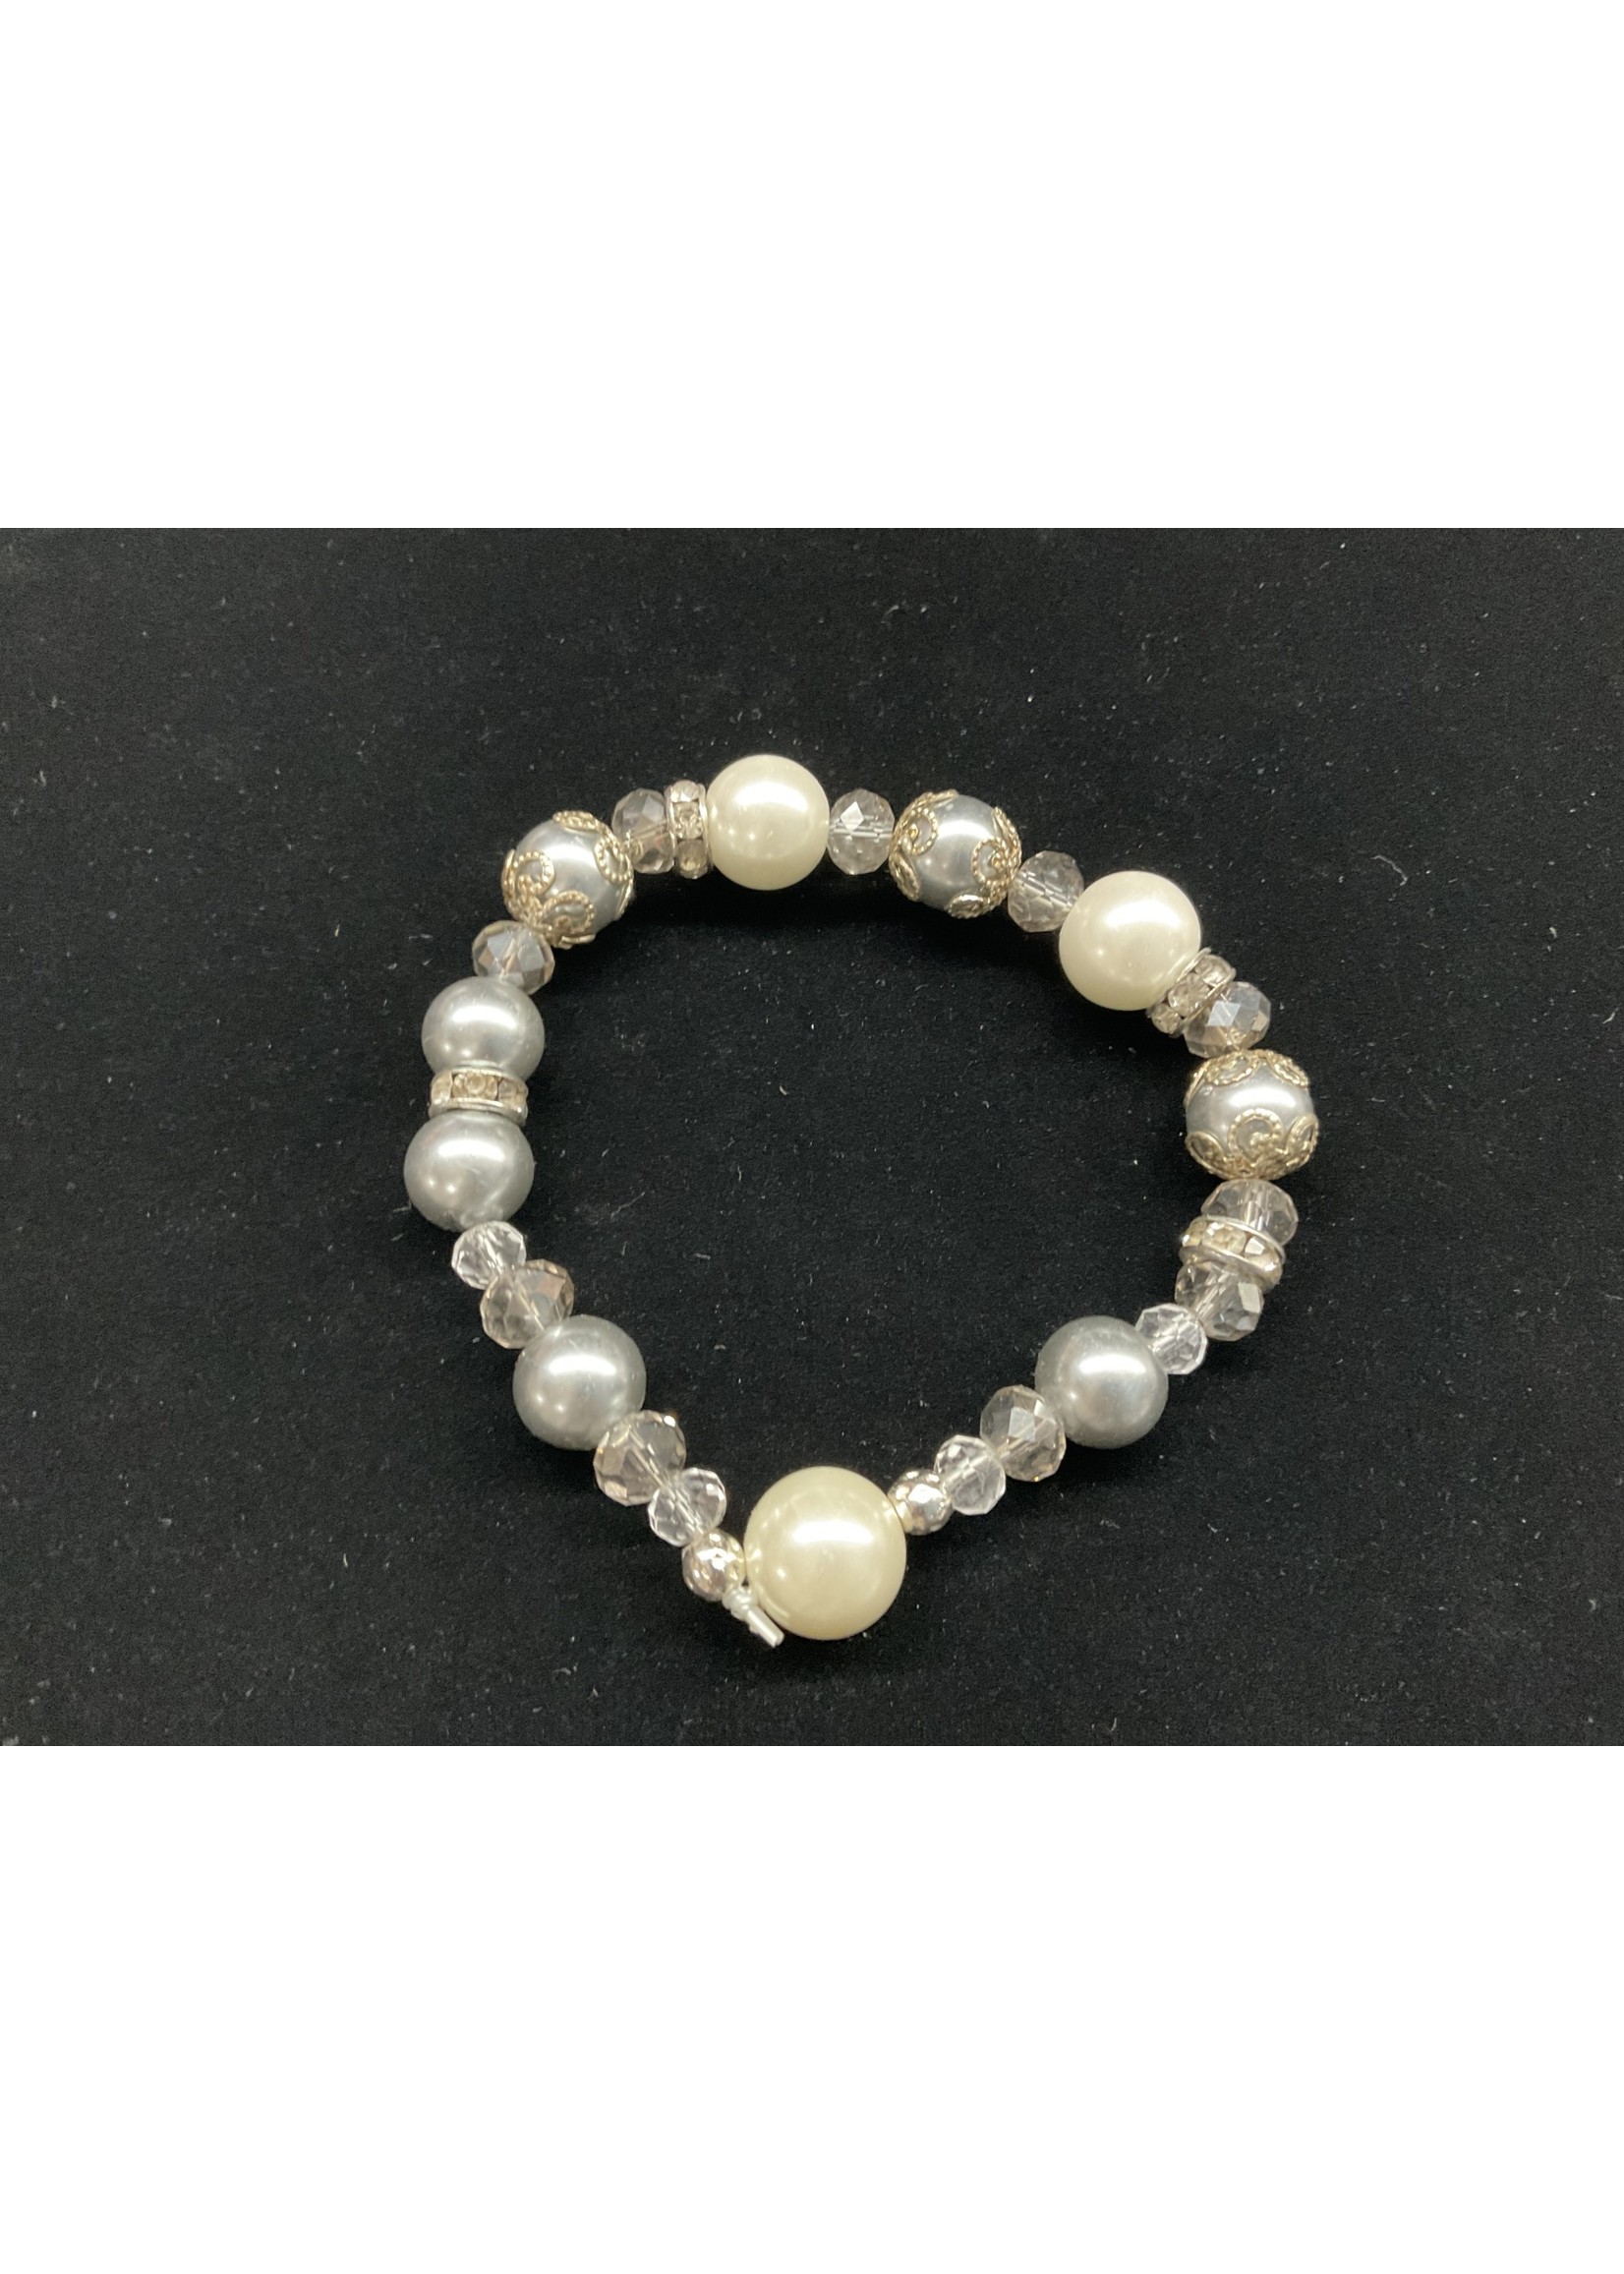 B40 Bracelet Elastic-Glass Pearl and Silver Filigree Beads - My